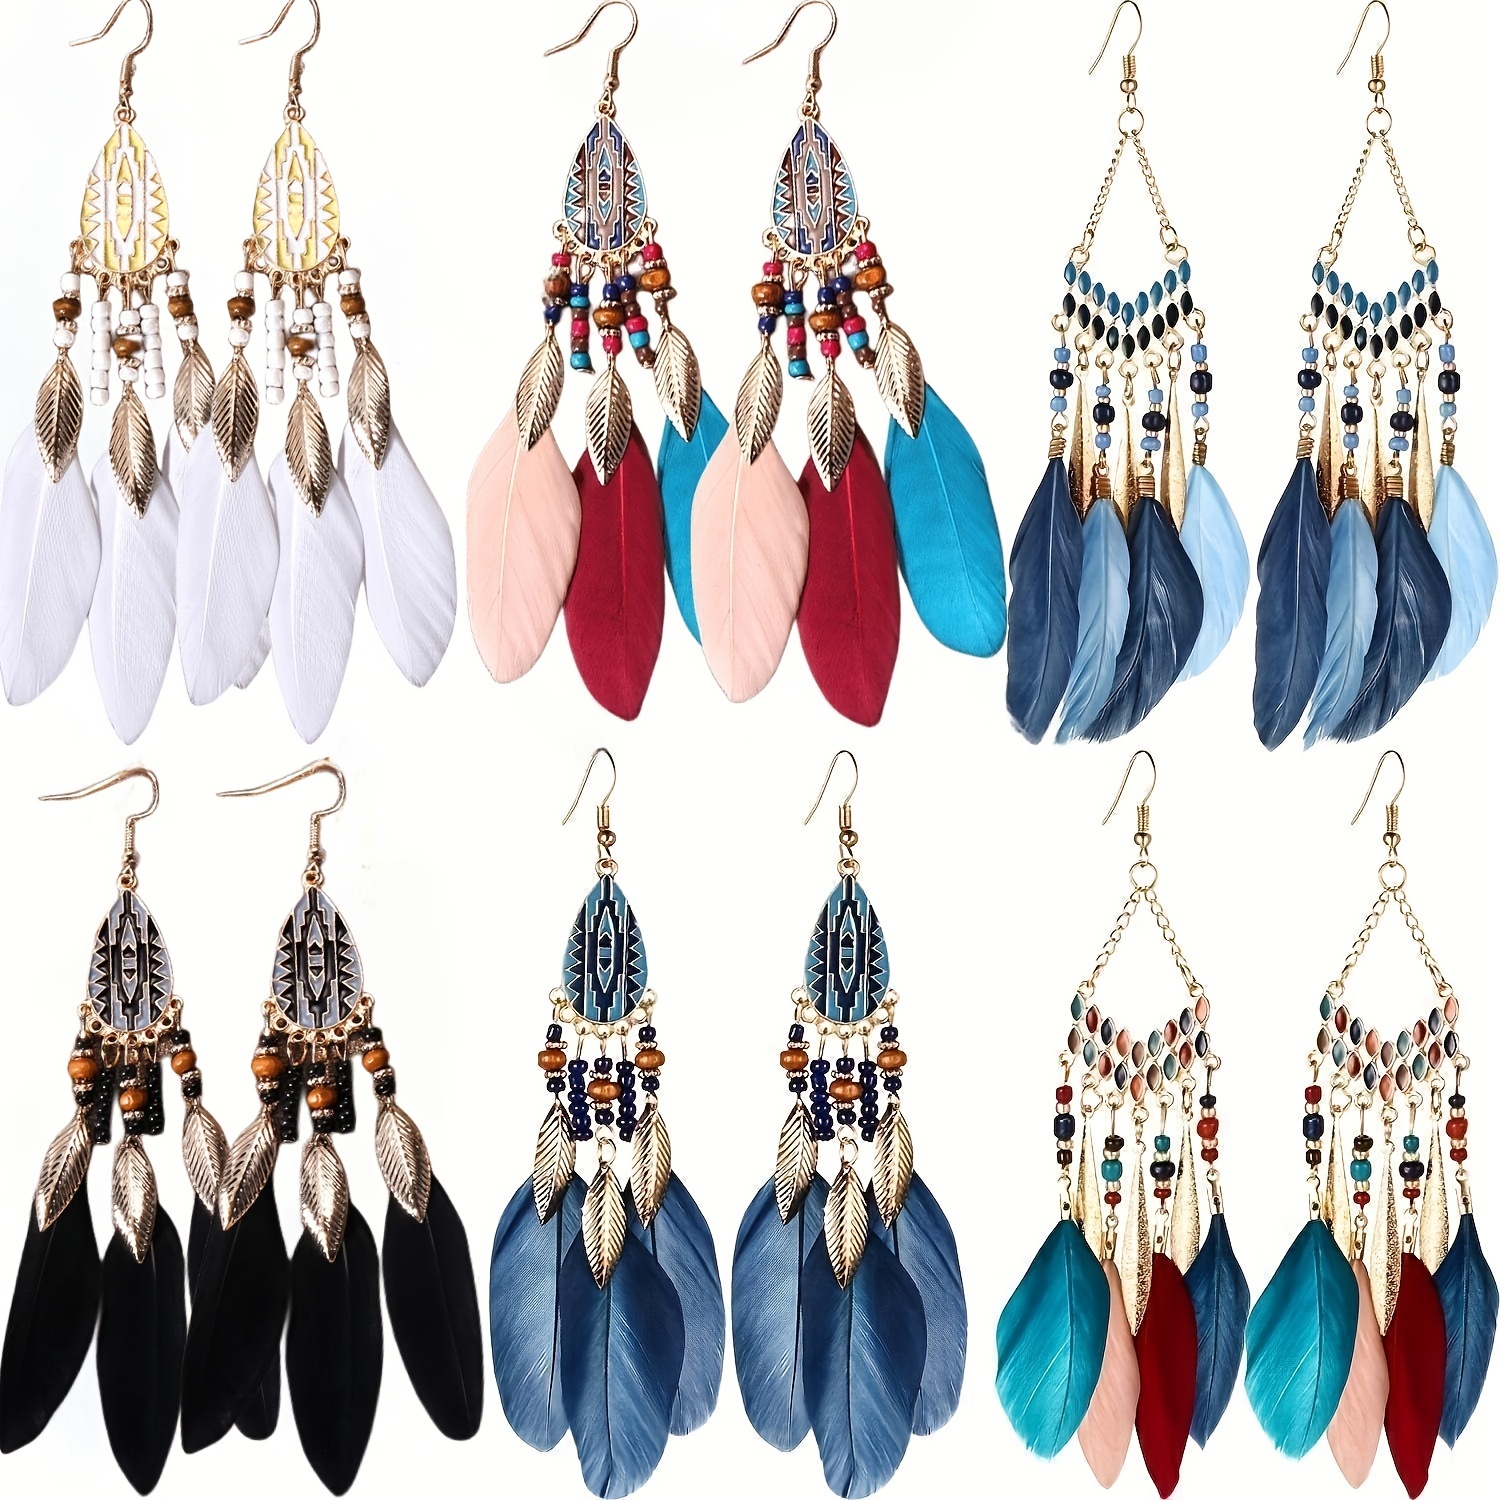 

6 Pairs Feather Tassel Design With Colorful Beads Decor Dangle Earrings Bohemian Vocation Style Alloy Jewelry Female Gift